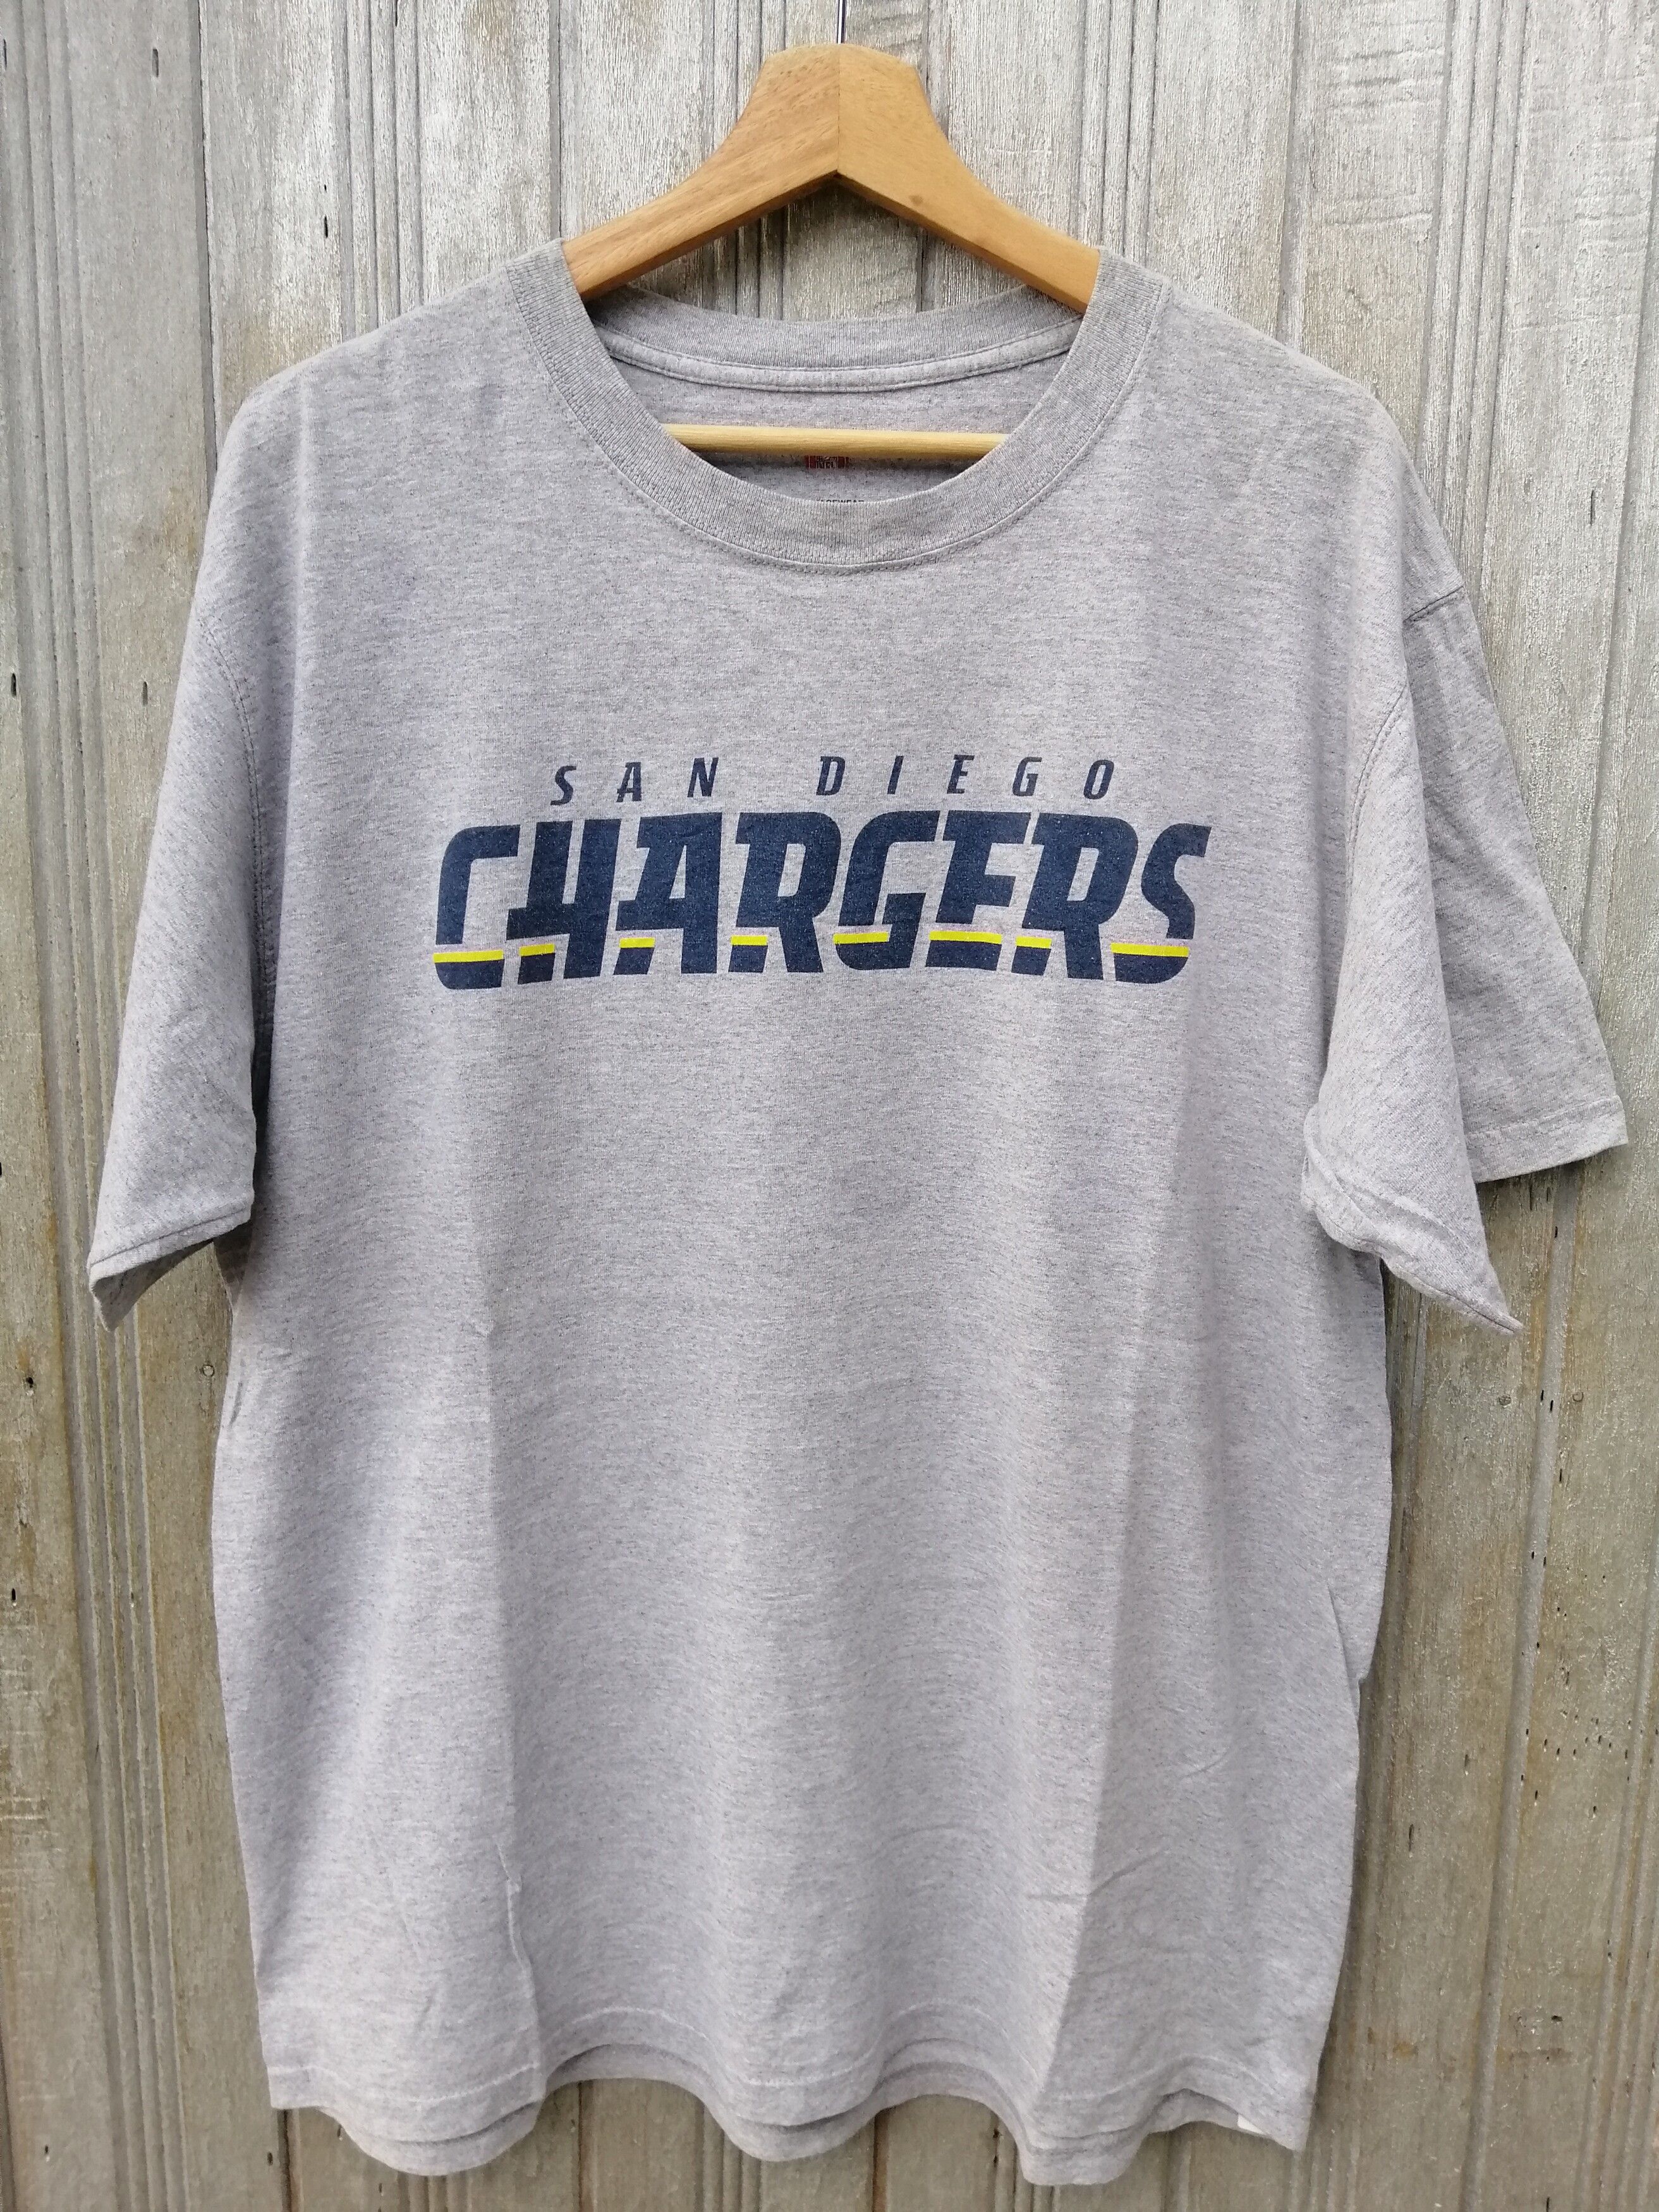 Vintage San Diego Chargers NFLP American Football Shirt Size L Size US L / EU 52-54 / 3 - 2 Preview